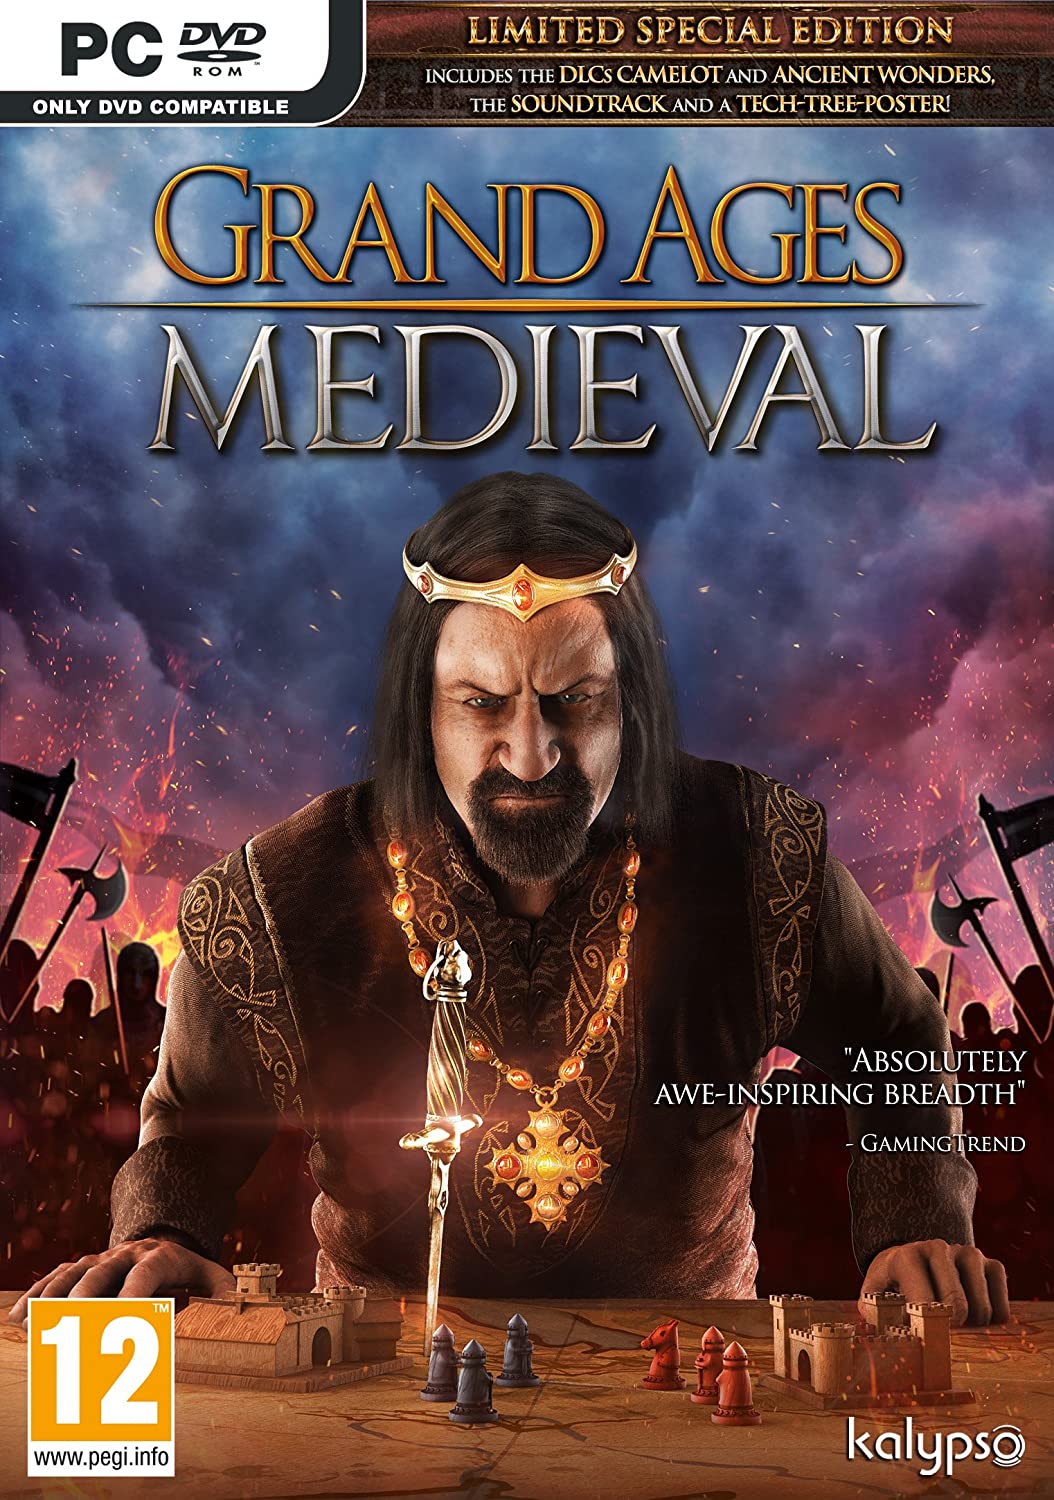 Grand Ages: Medieval - Limited Special Edition PC DVD